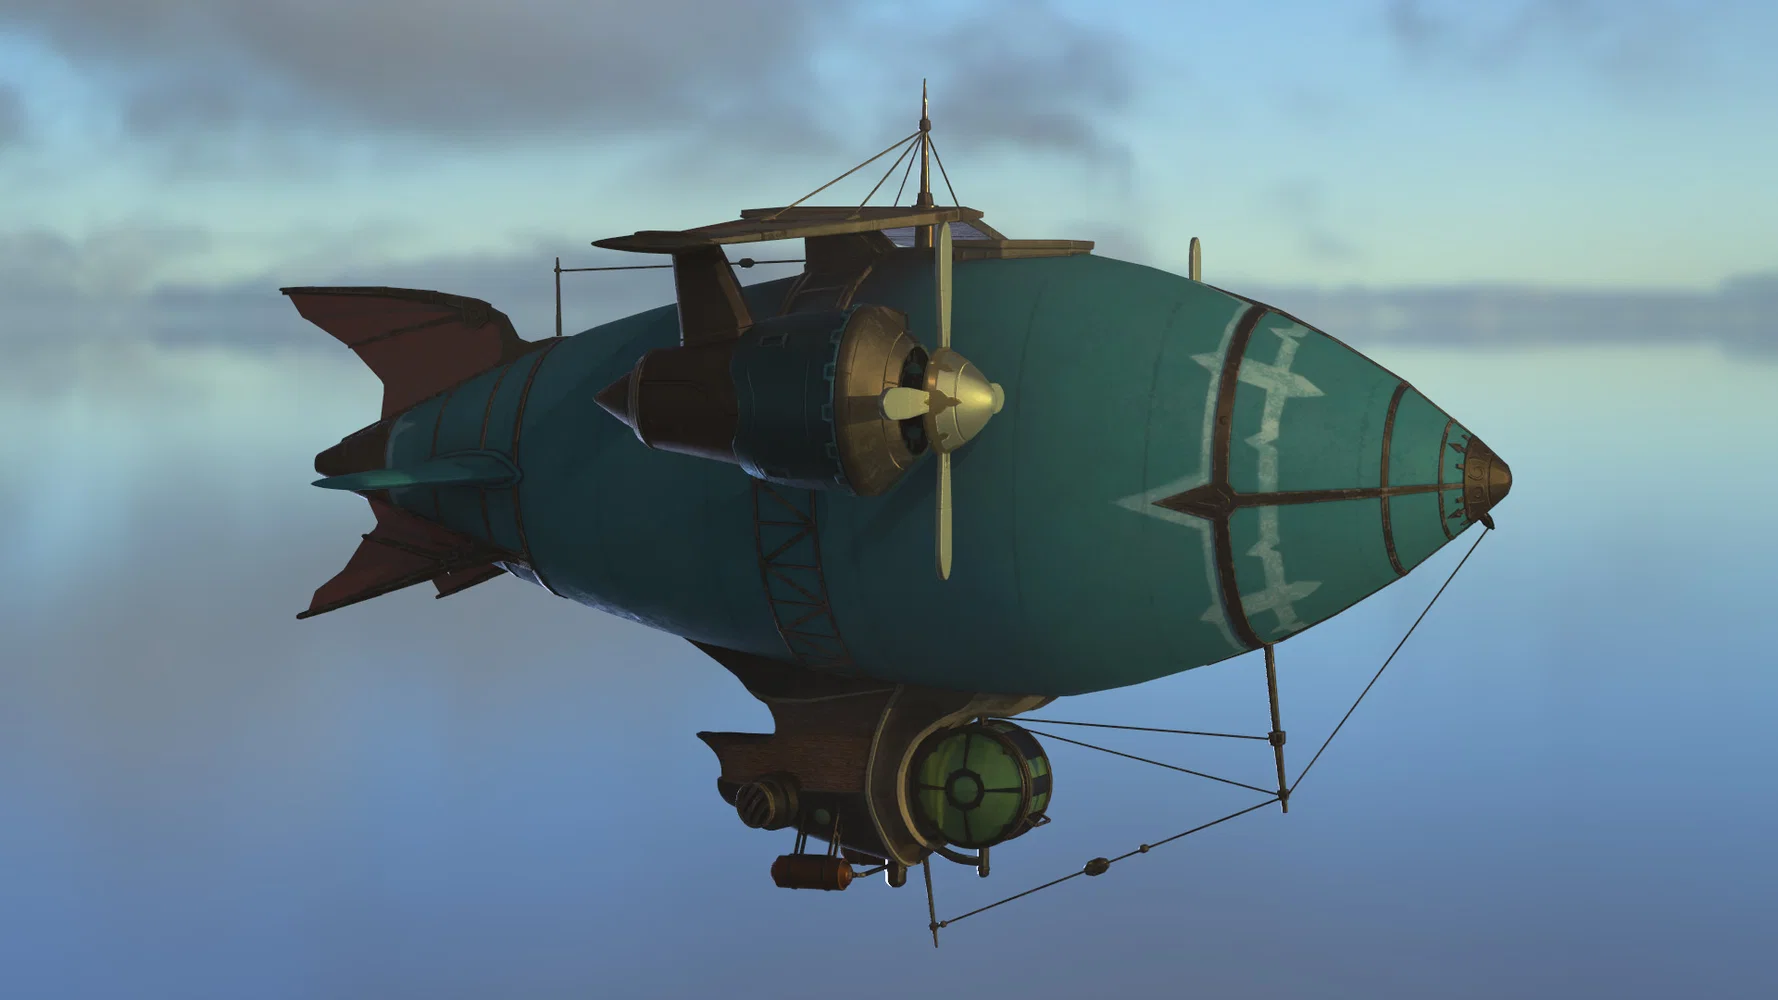 Steampunk Airship (inspired by a concept painting from the game Sky2Fly)